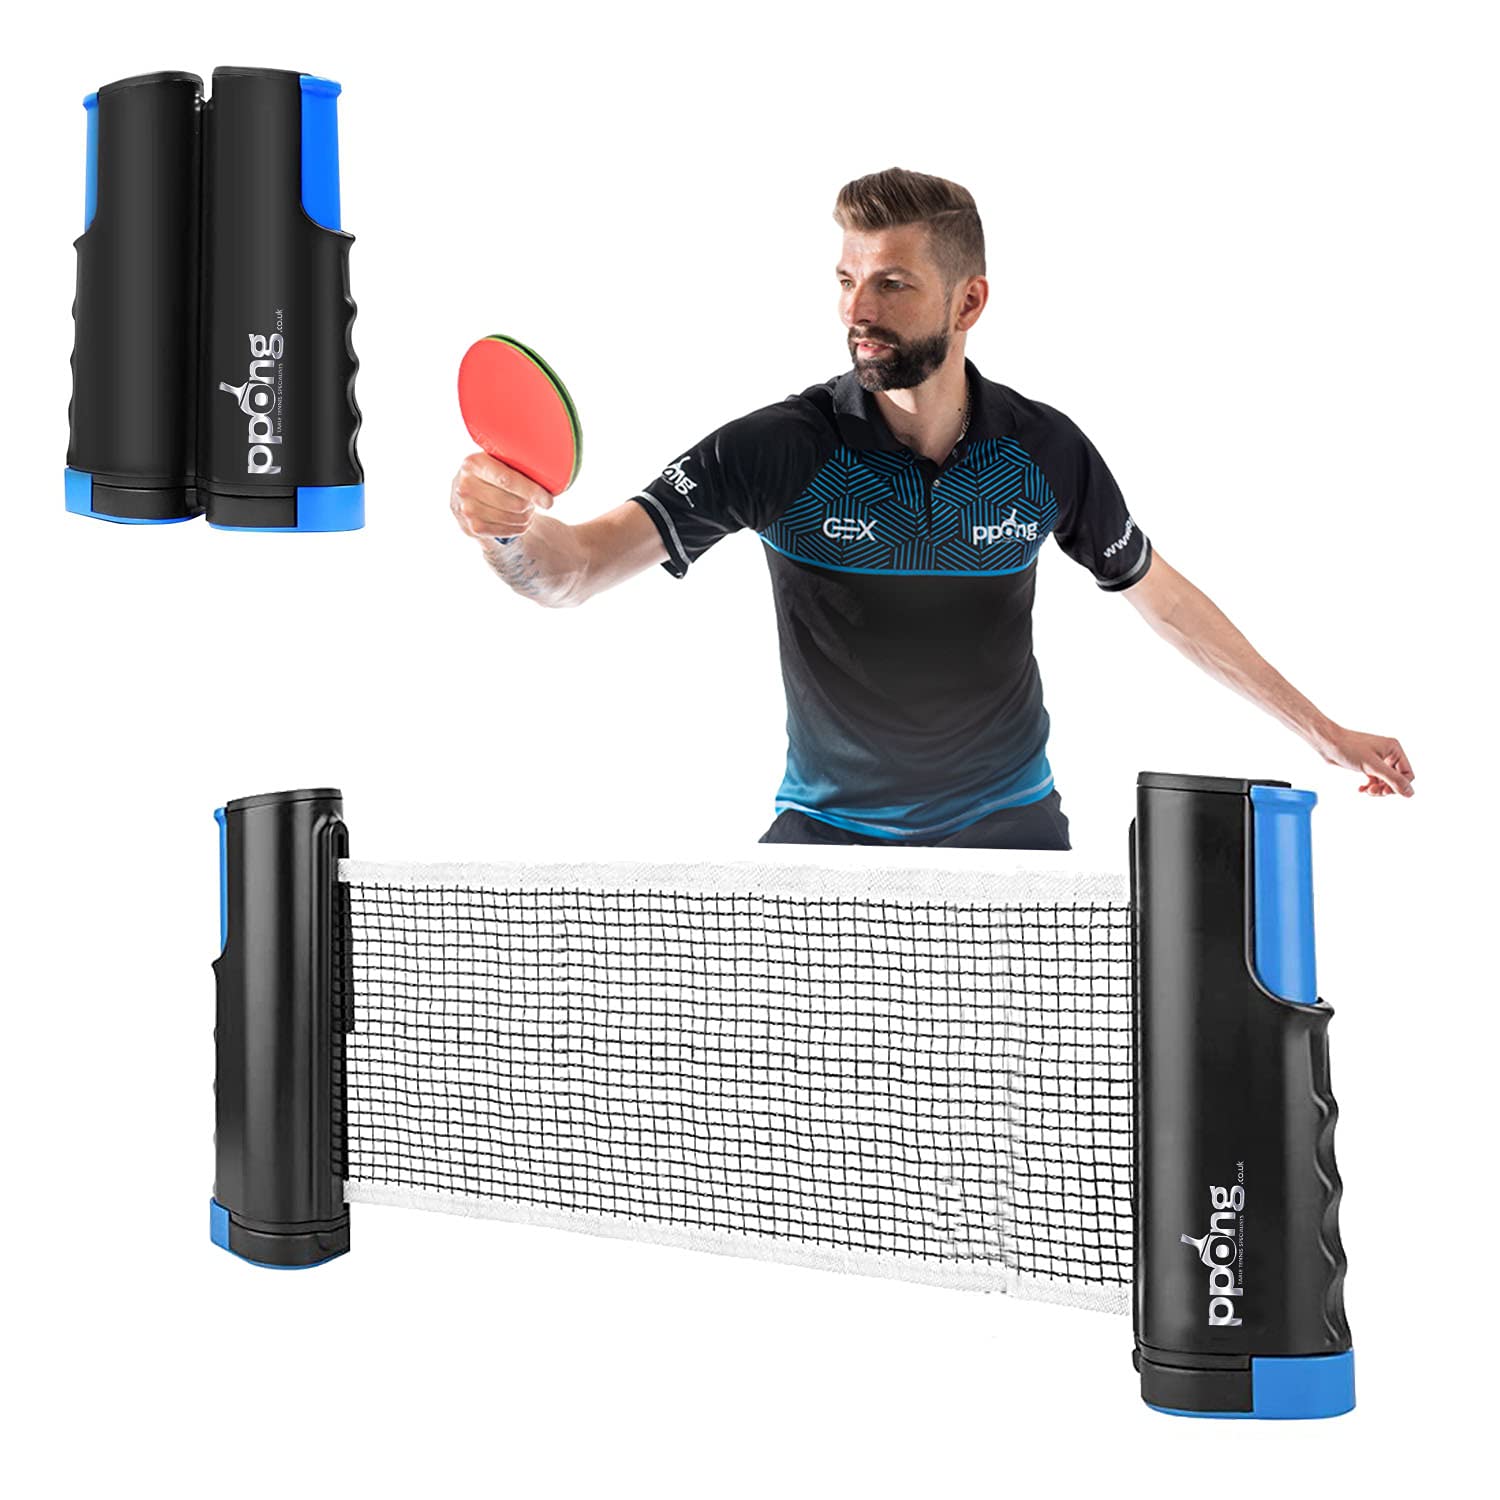 Retractable Anywhere Table Tennis Set